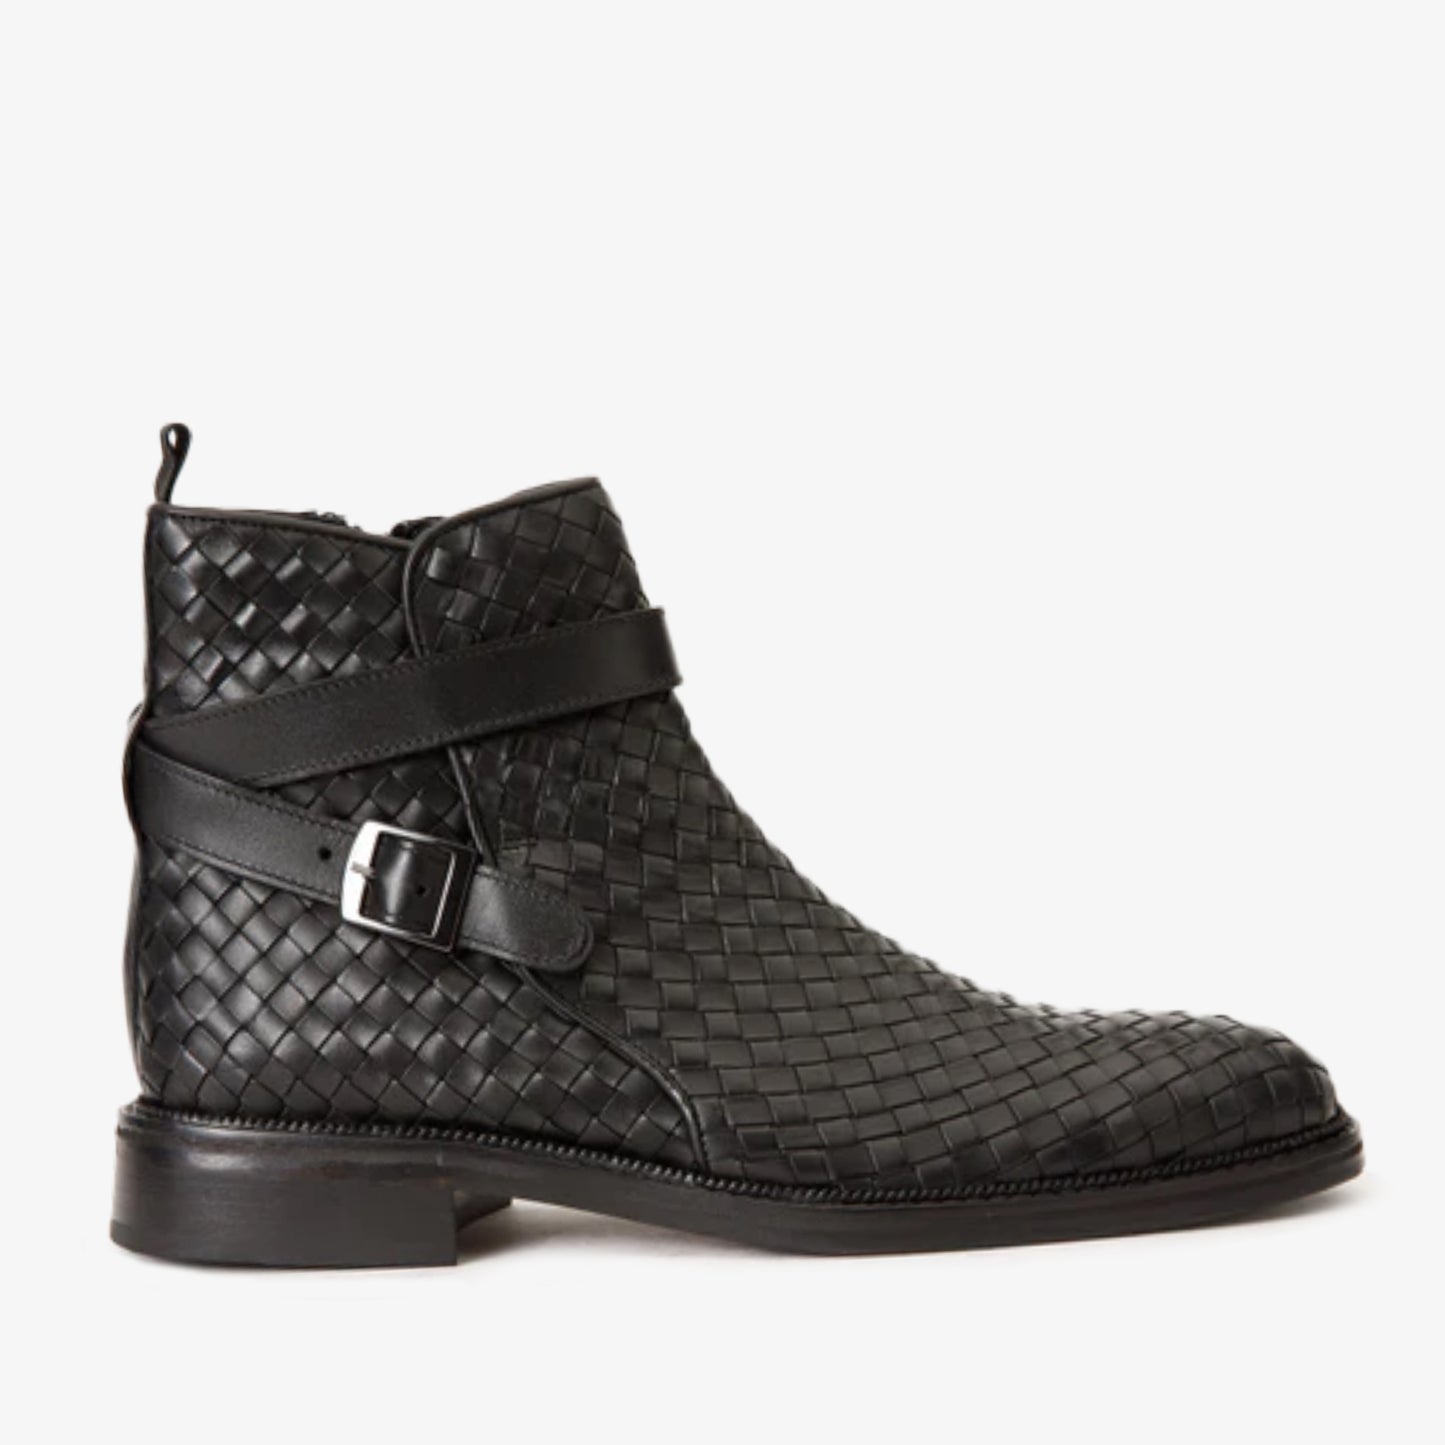 The Morral Black Handwoven Leather Cross Strap Buckle Zip-Up Men Boot